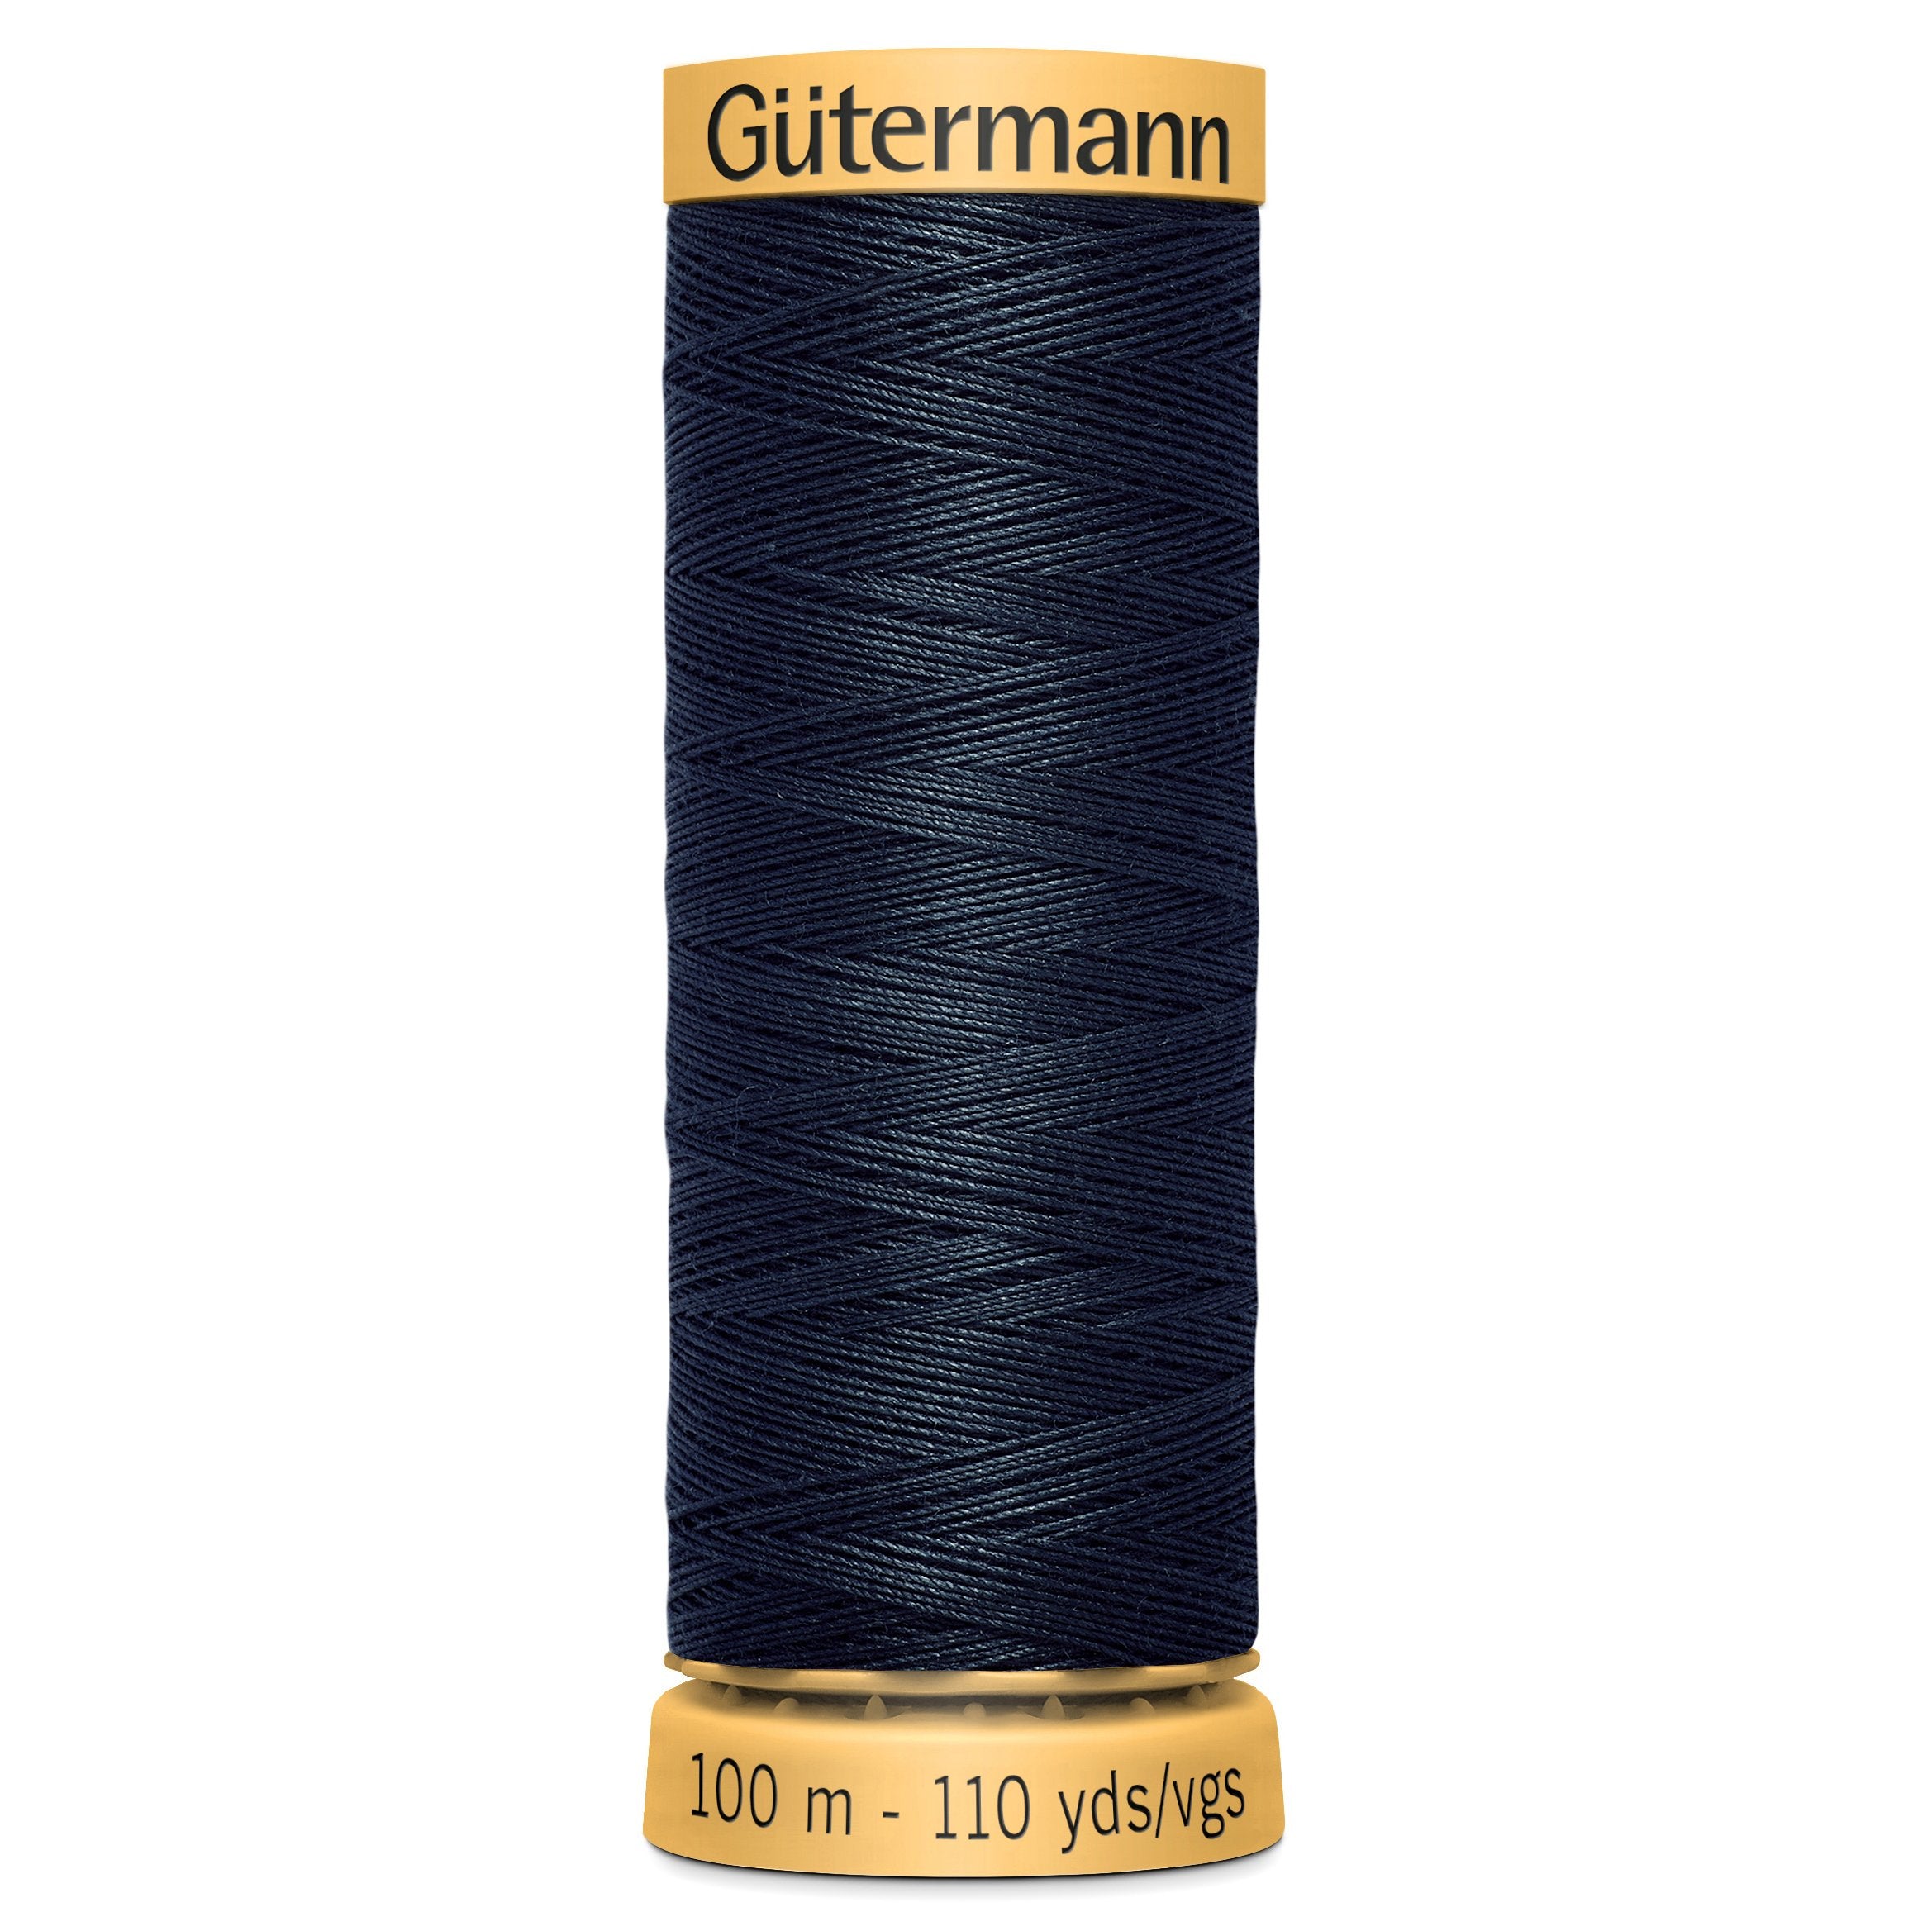 Gutermann Natural Cotton - 5412 from Jaycotts Sewing Supplies